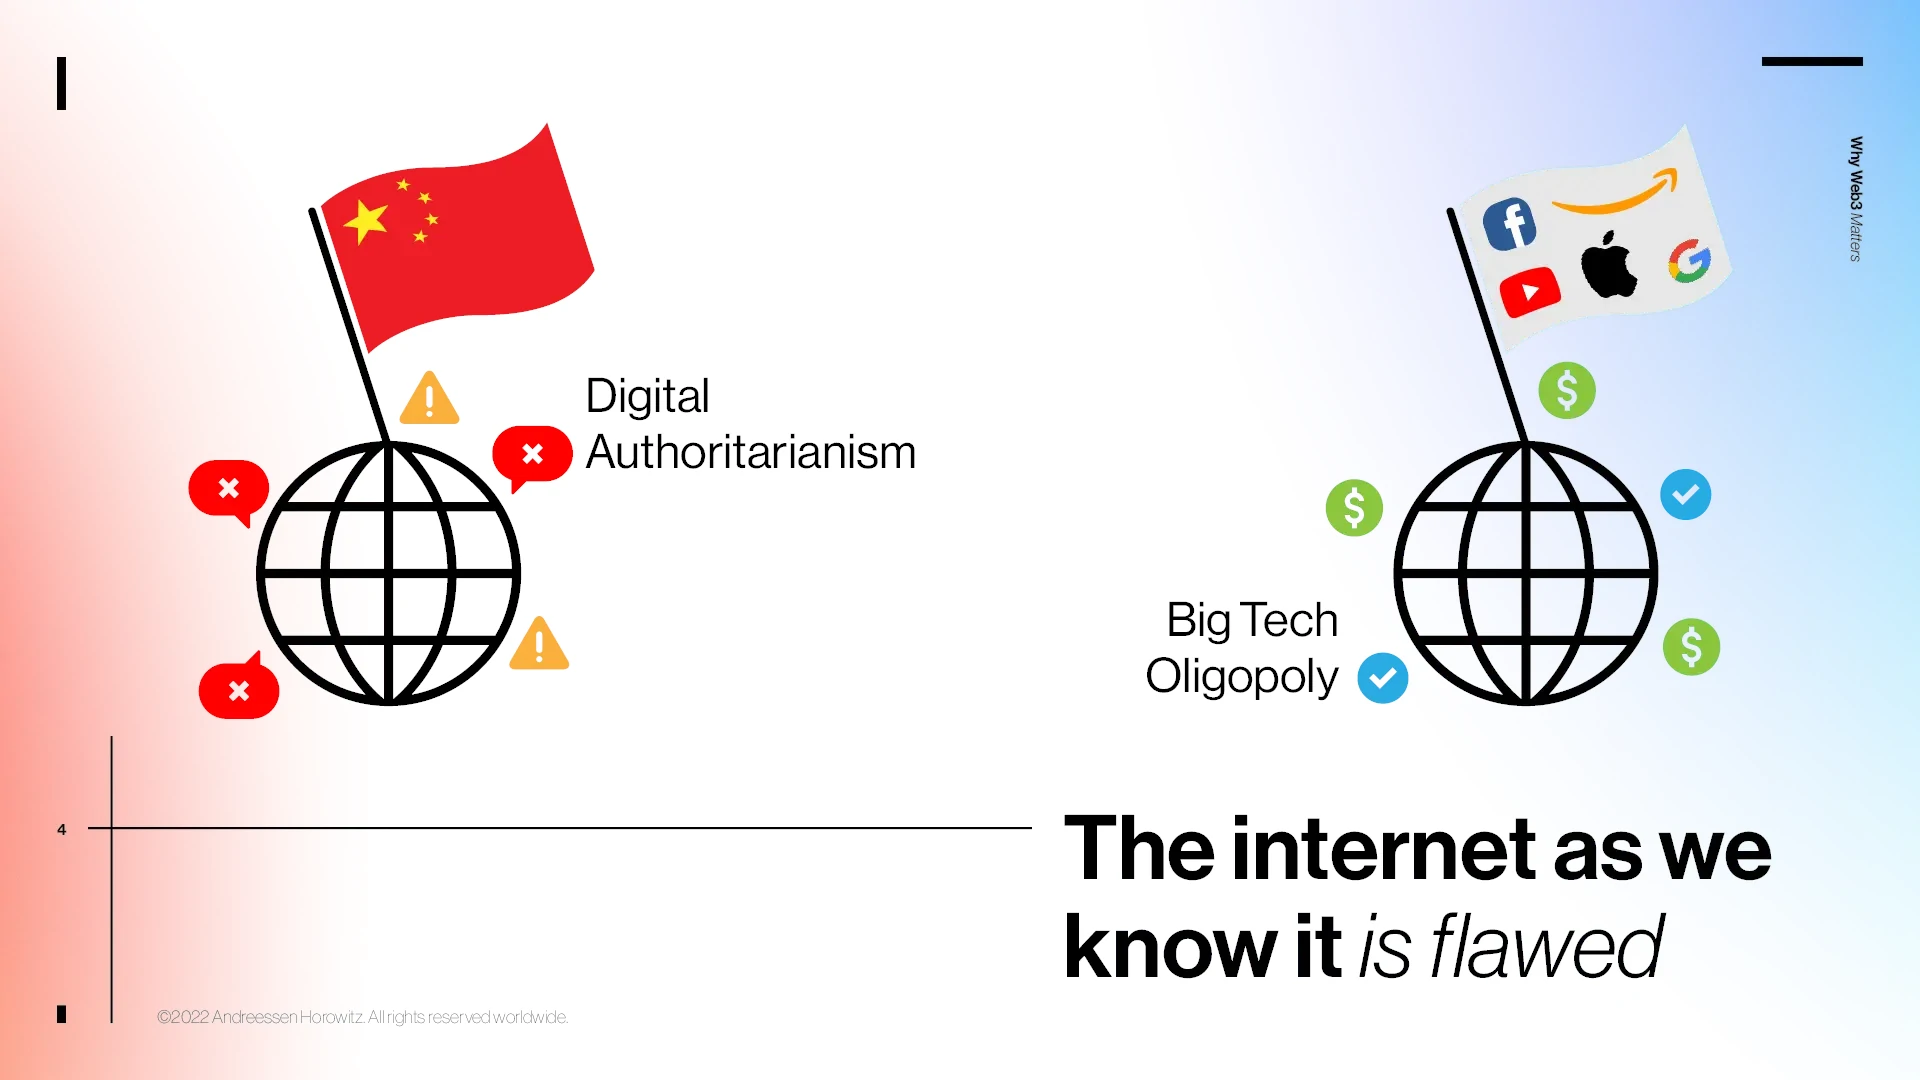 Slide titled 'The internet as we know it is flawed', showing two globe icons with flags planted in them. On the left, the globe has the Chinese flag and is surrounded by red speech bubbles with Xs in them and yellow triangular warning symbols. It is captioned 'Digital Authoritarianism'. On the right is a globe with a flag containing the logos of Facebook, Amazon, YouTube, Apple, and Google, surrounded by green circles with dollar signs and blue circles with checkmarks. It is captioned 'Big Tech Oligopoly'.